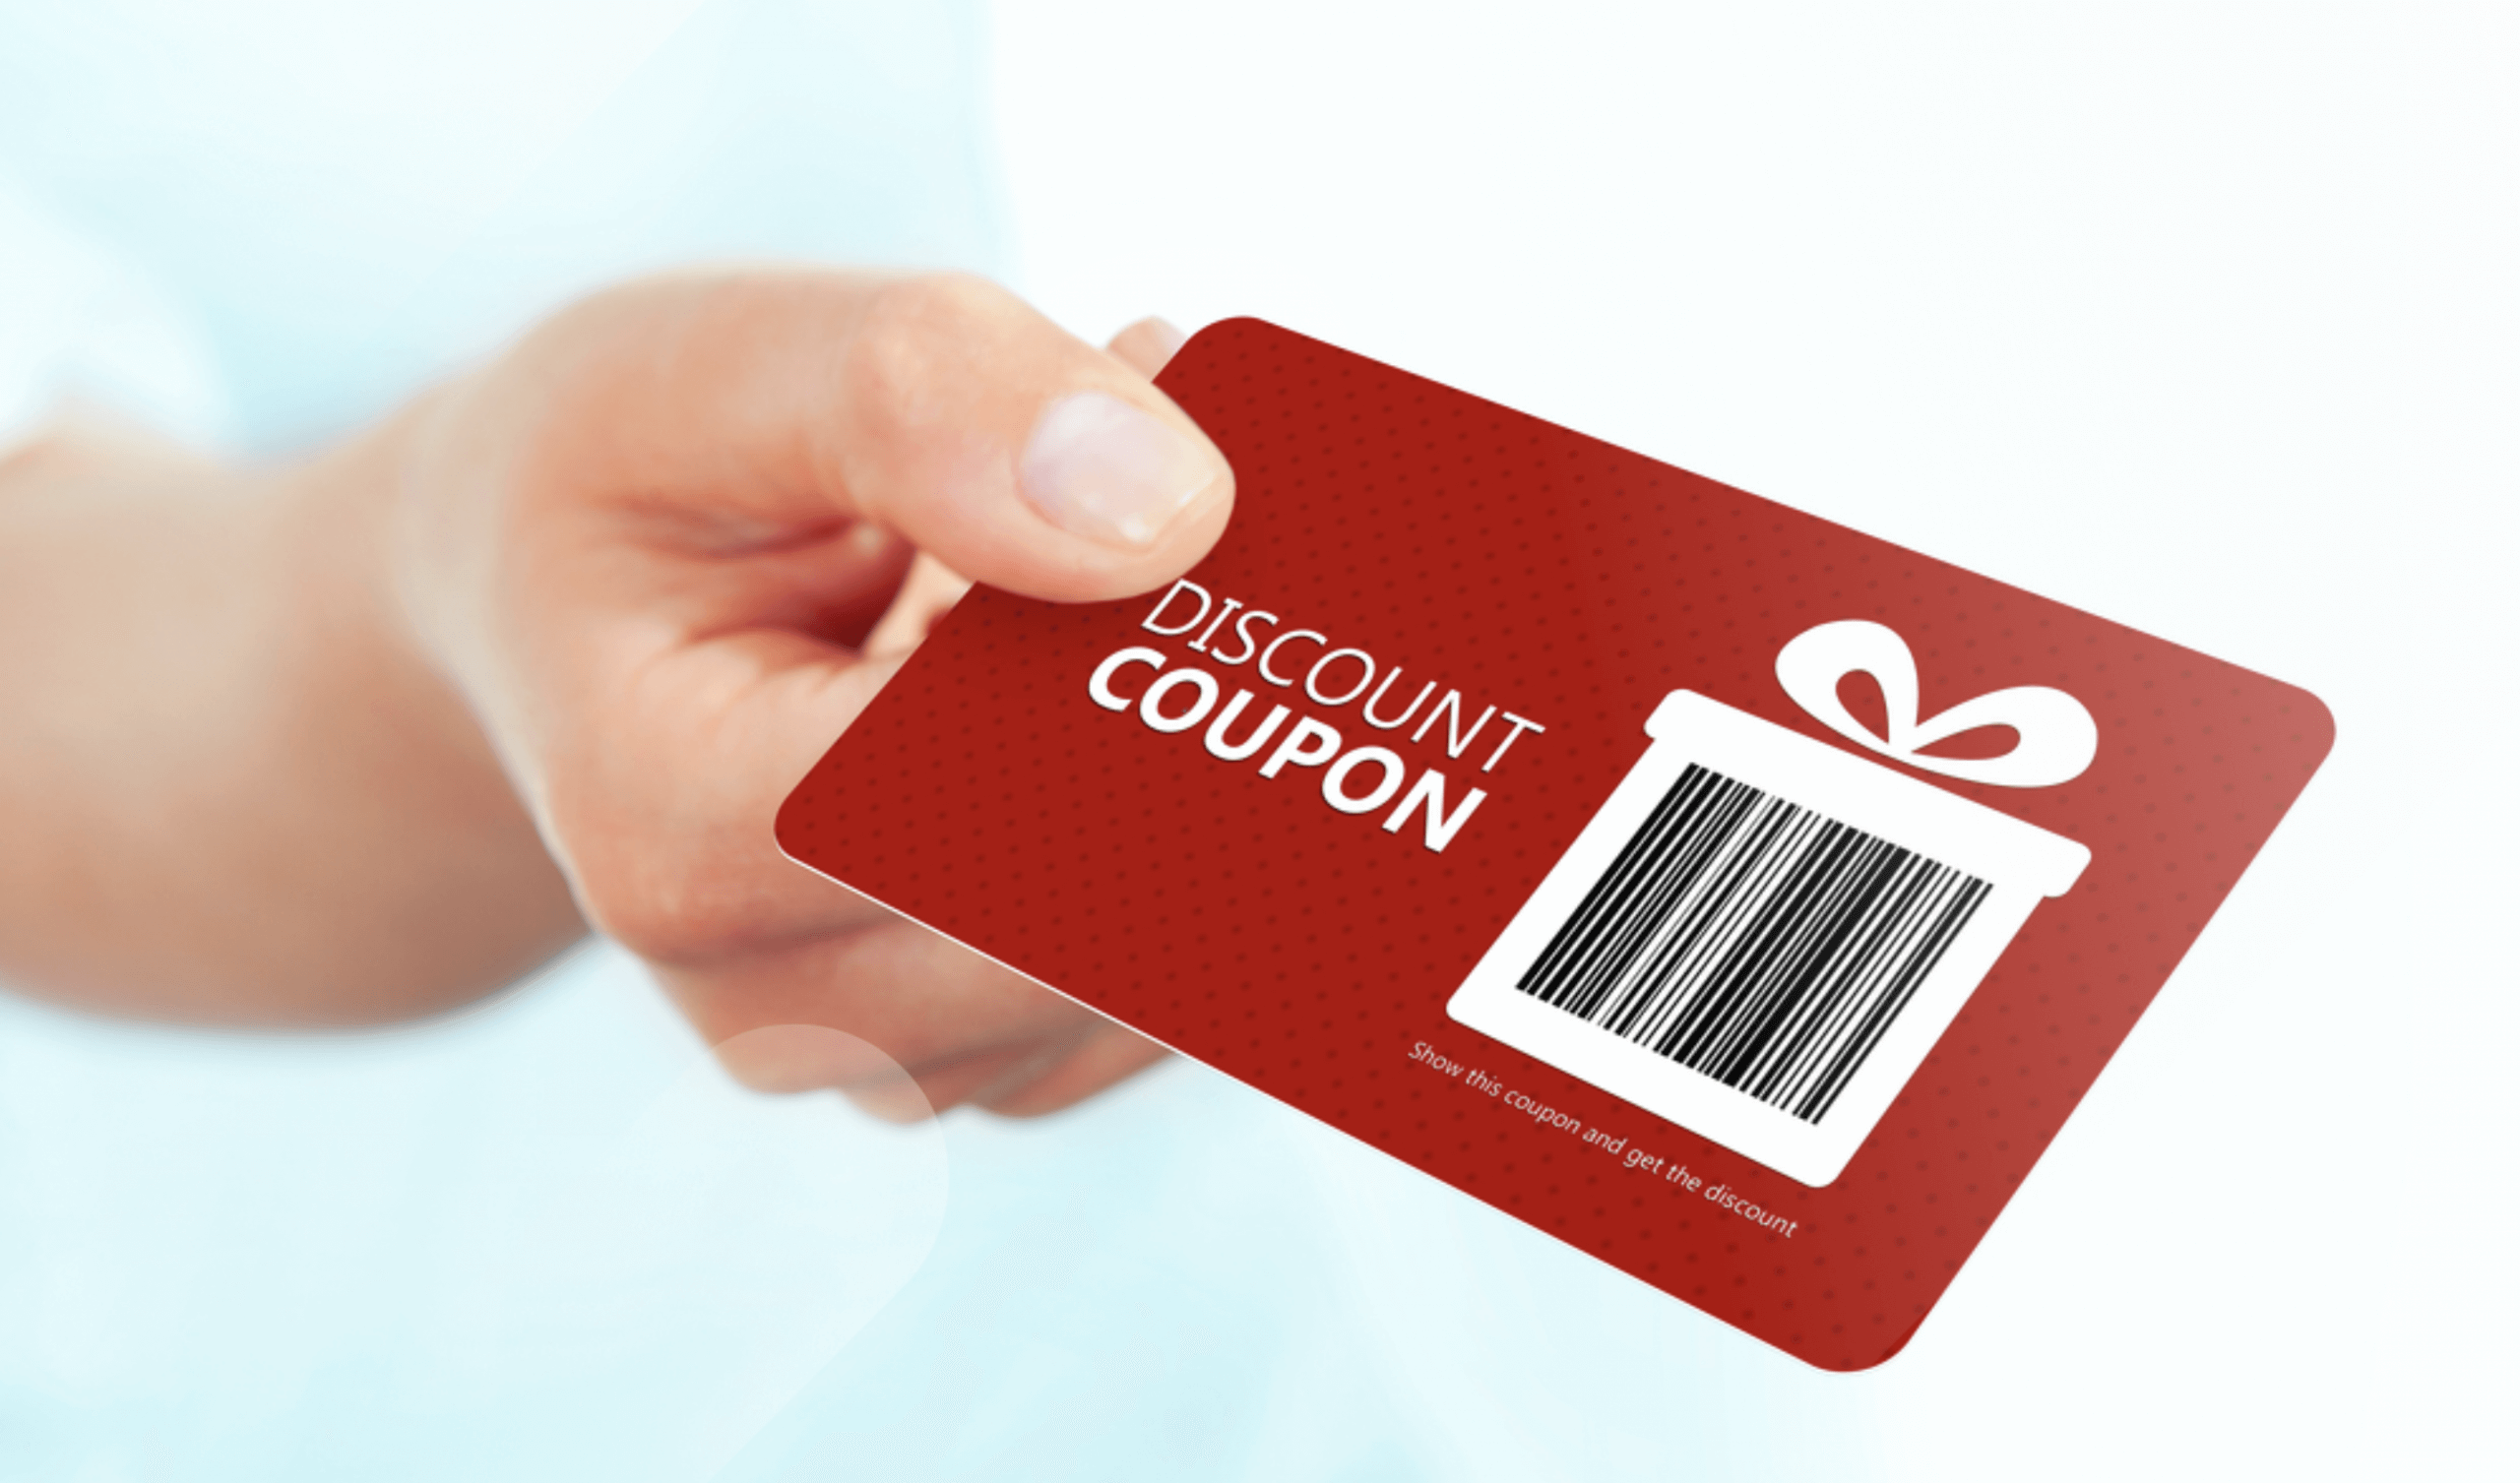 How to Increase Your Visibility Using Discount Coupons?